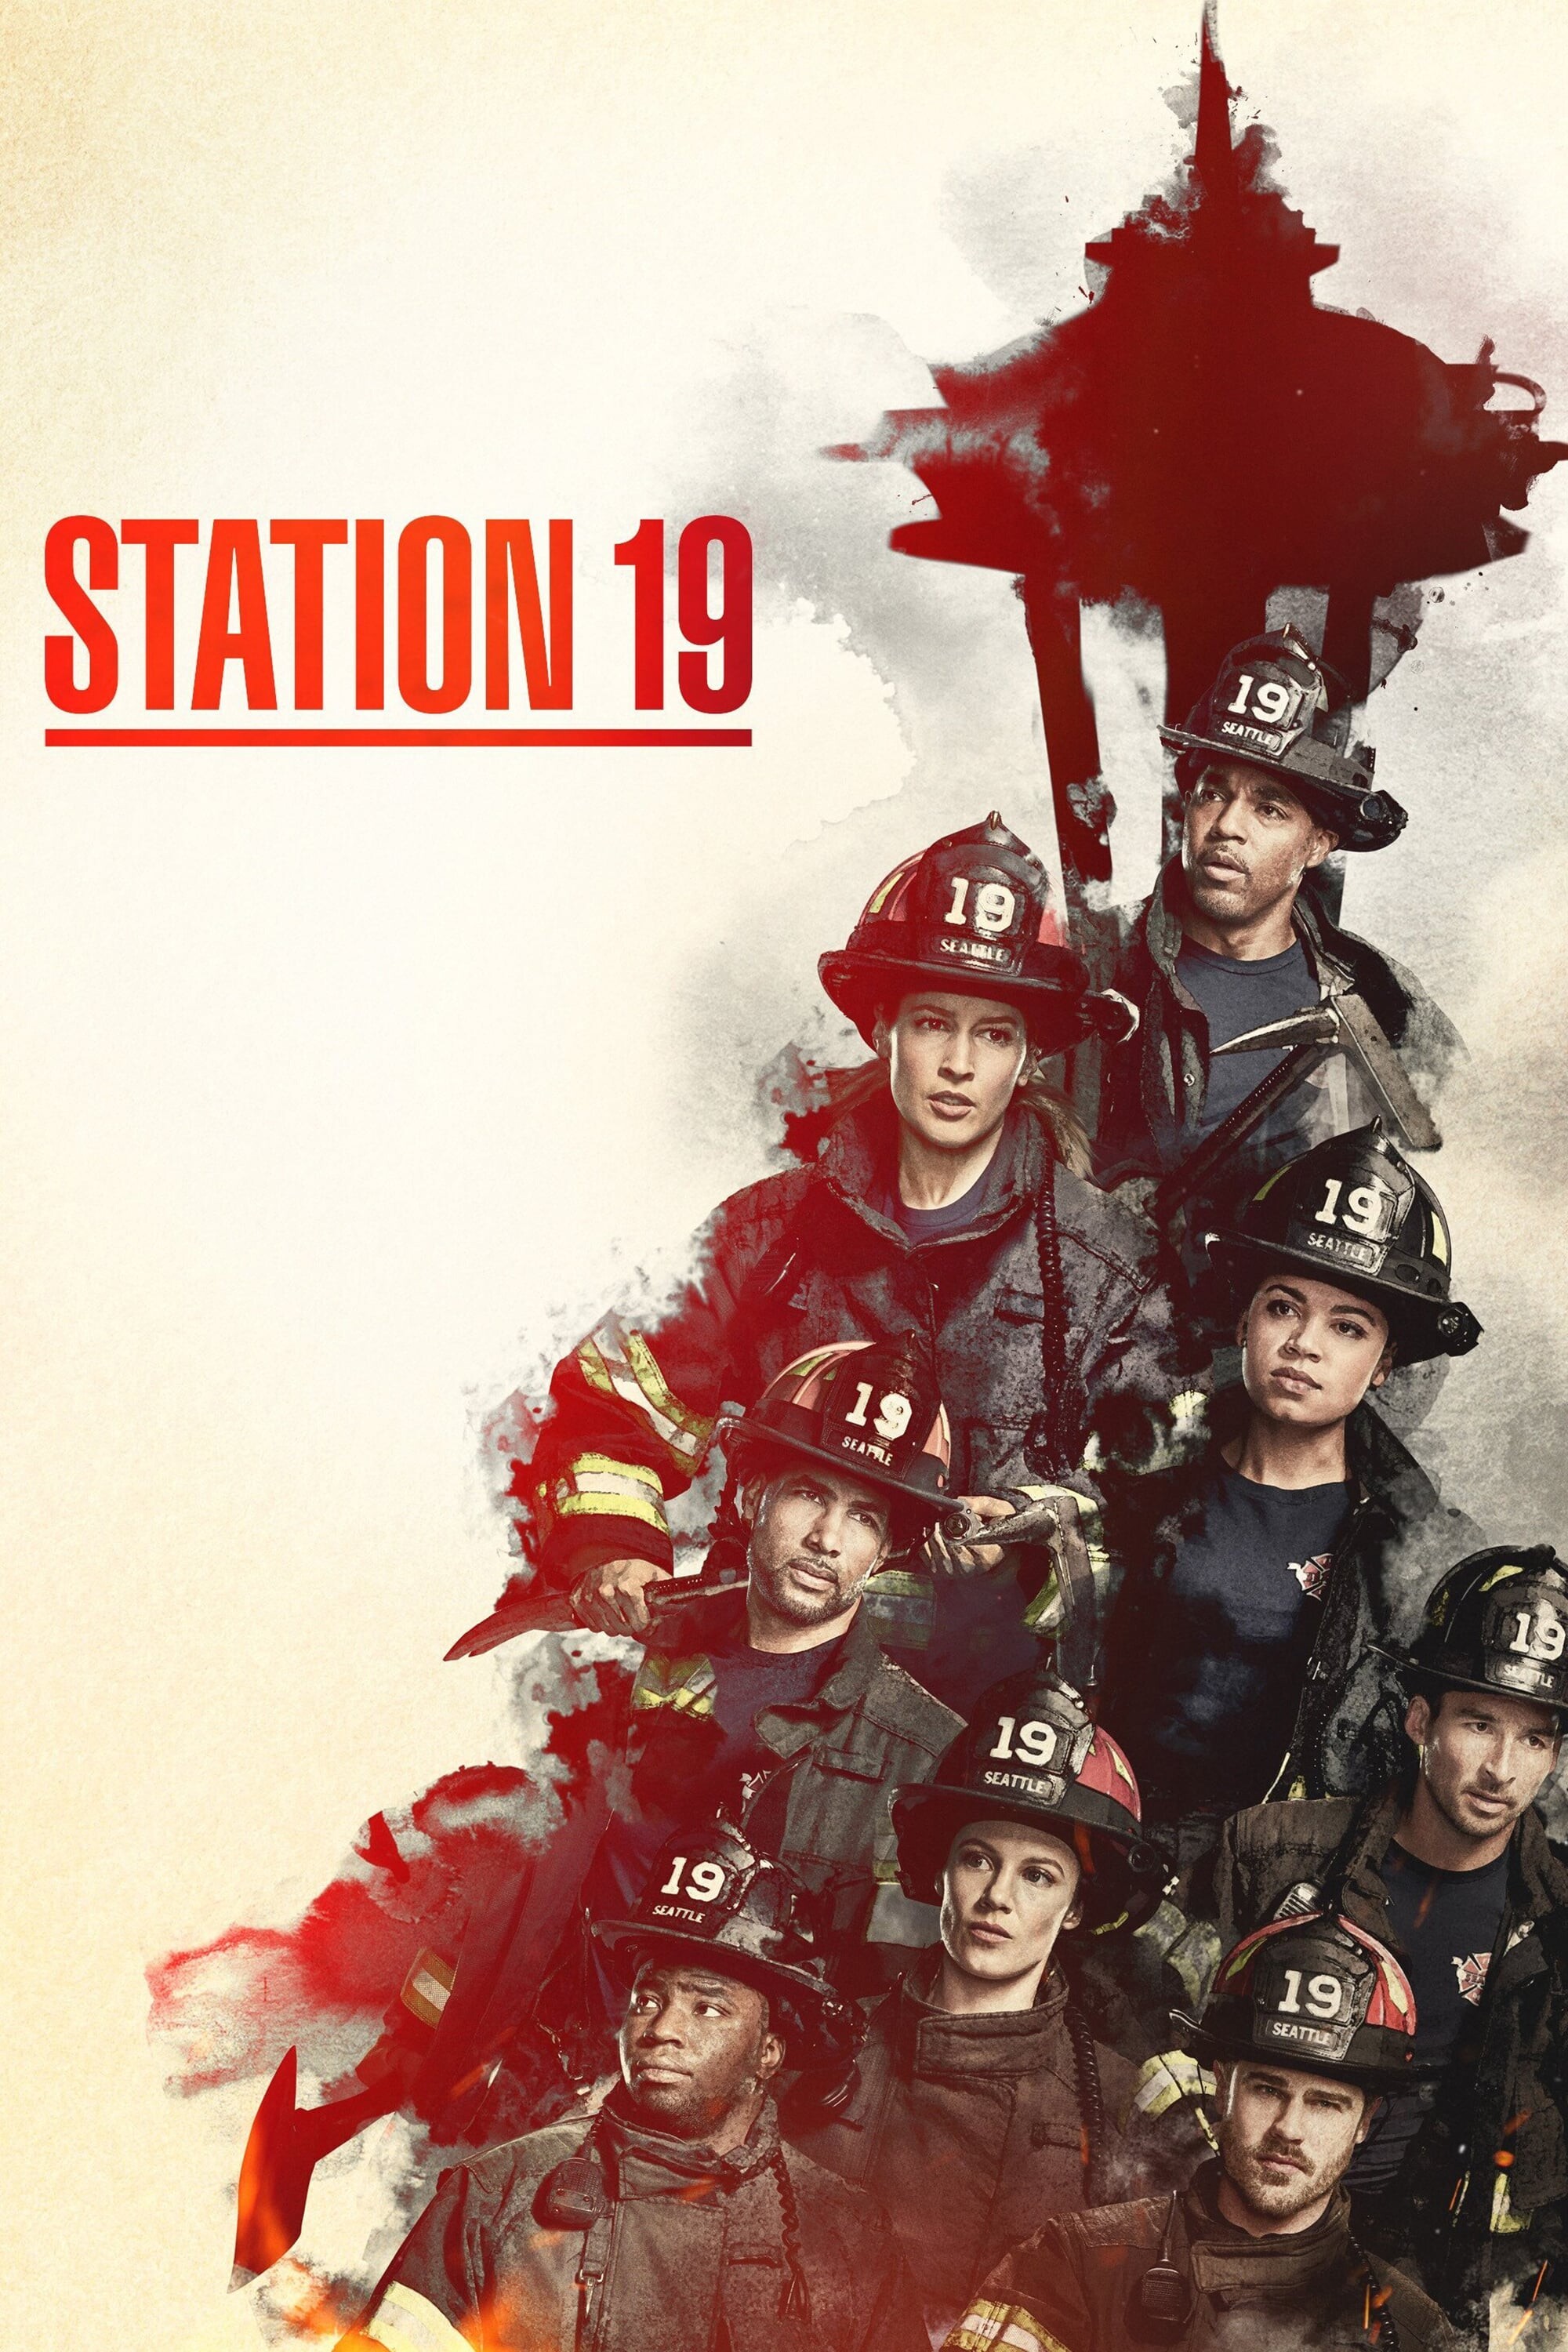 Station 19 (TV Series): Introducing Poster, 77 Episodes Over 5 Seasons, ABC Domestic Television, Firefighters. 2000x3000 HD Wallpaper.